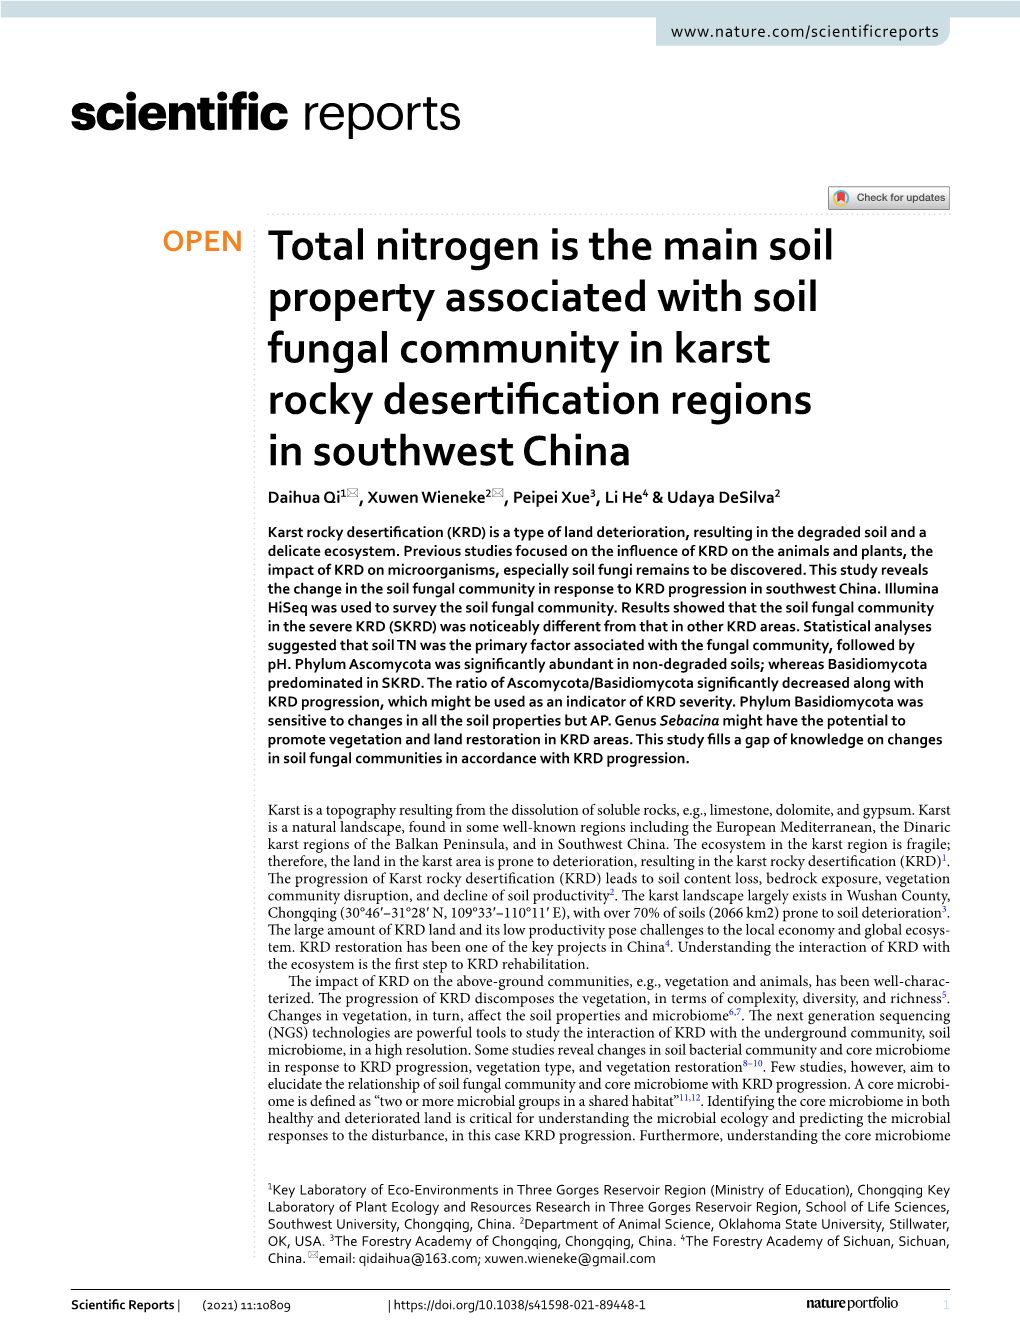 Total Nitrogen Is the Main Soil Property Associated with Soil Fungal